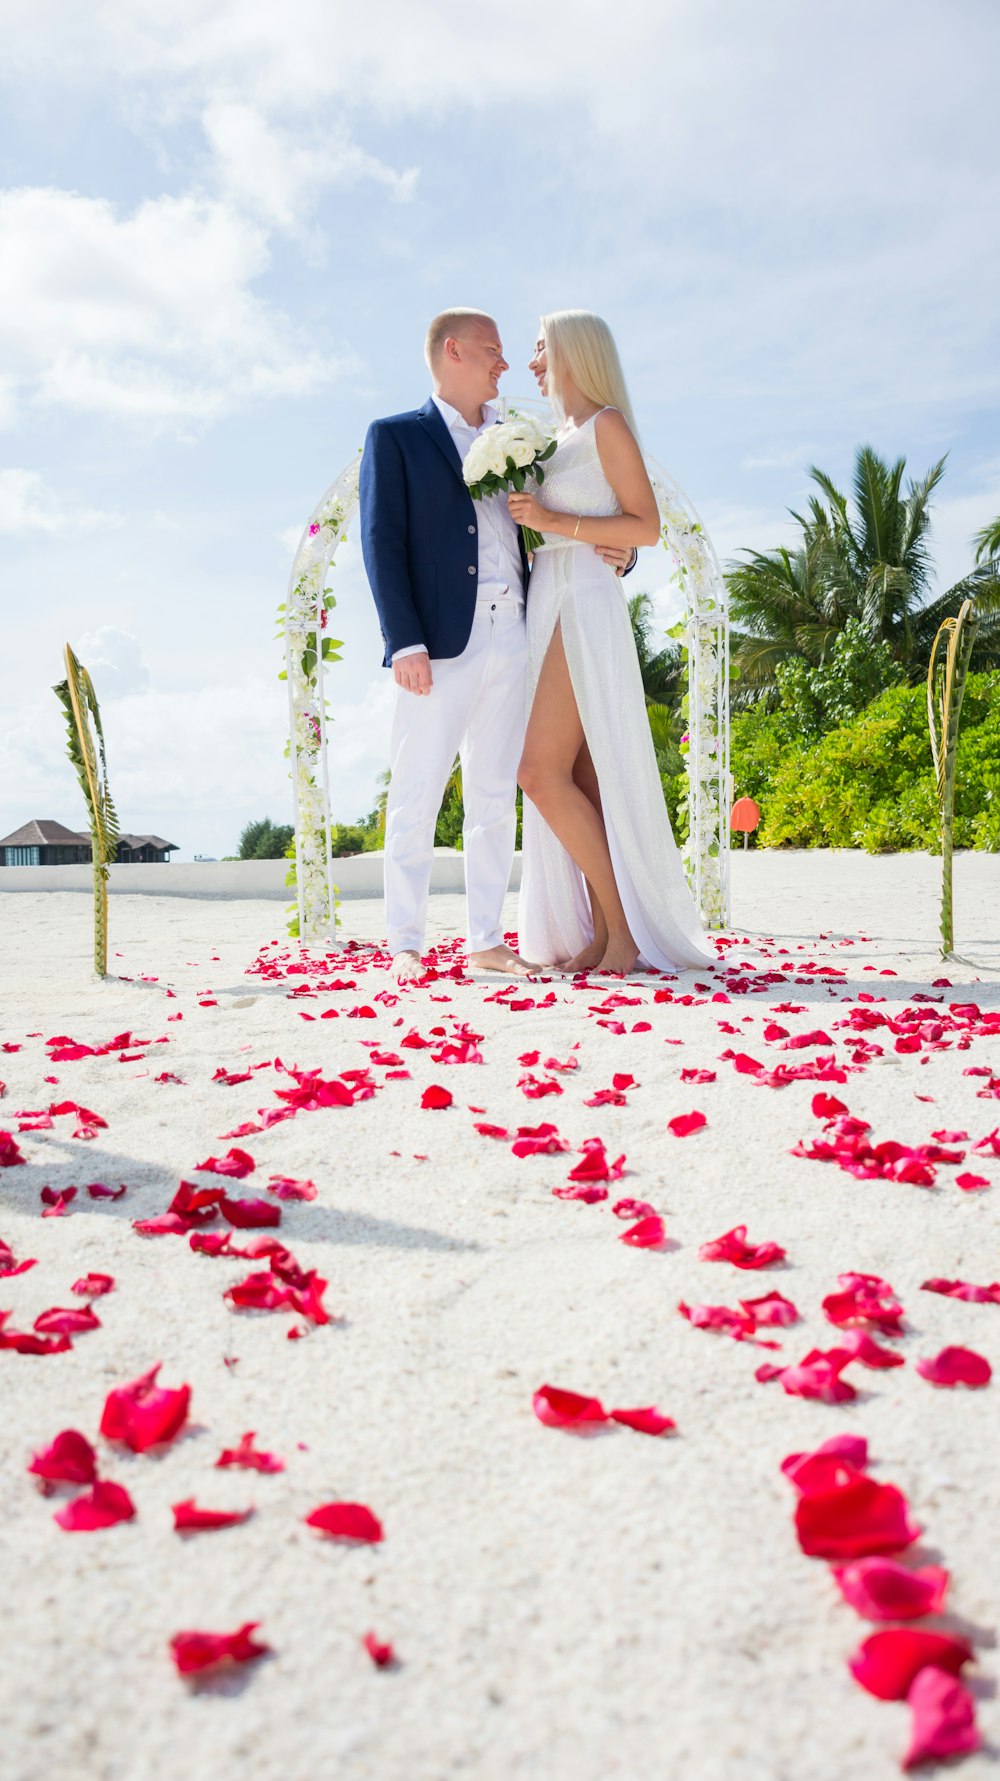 man in black suit and woman in white wedding dress walking on white sand during daytime